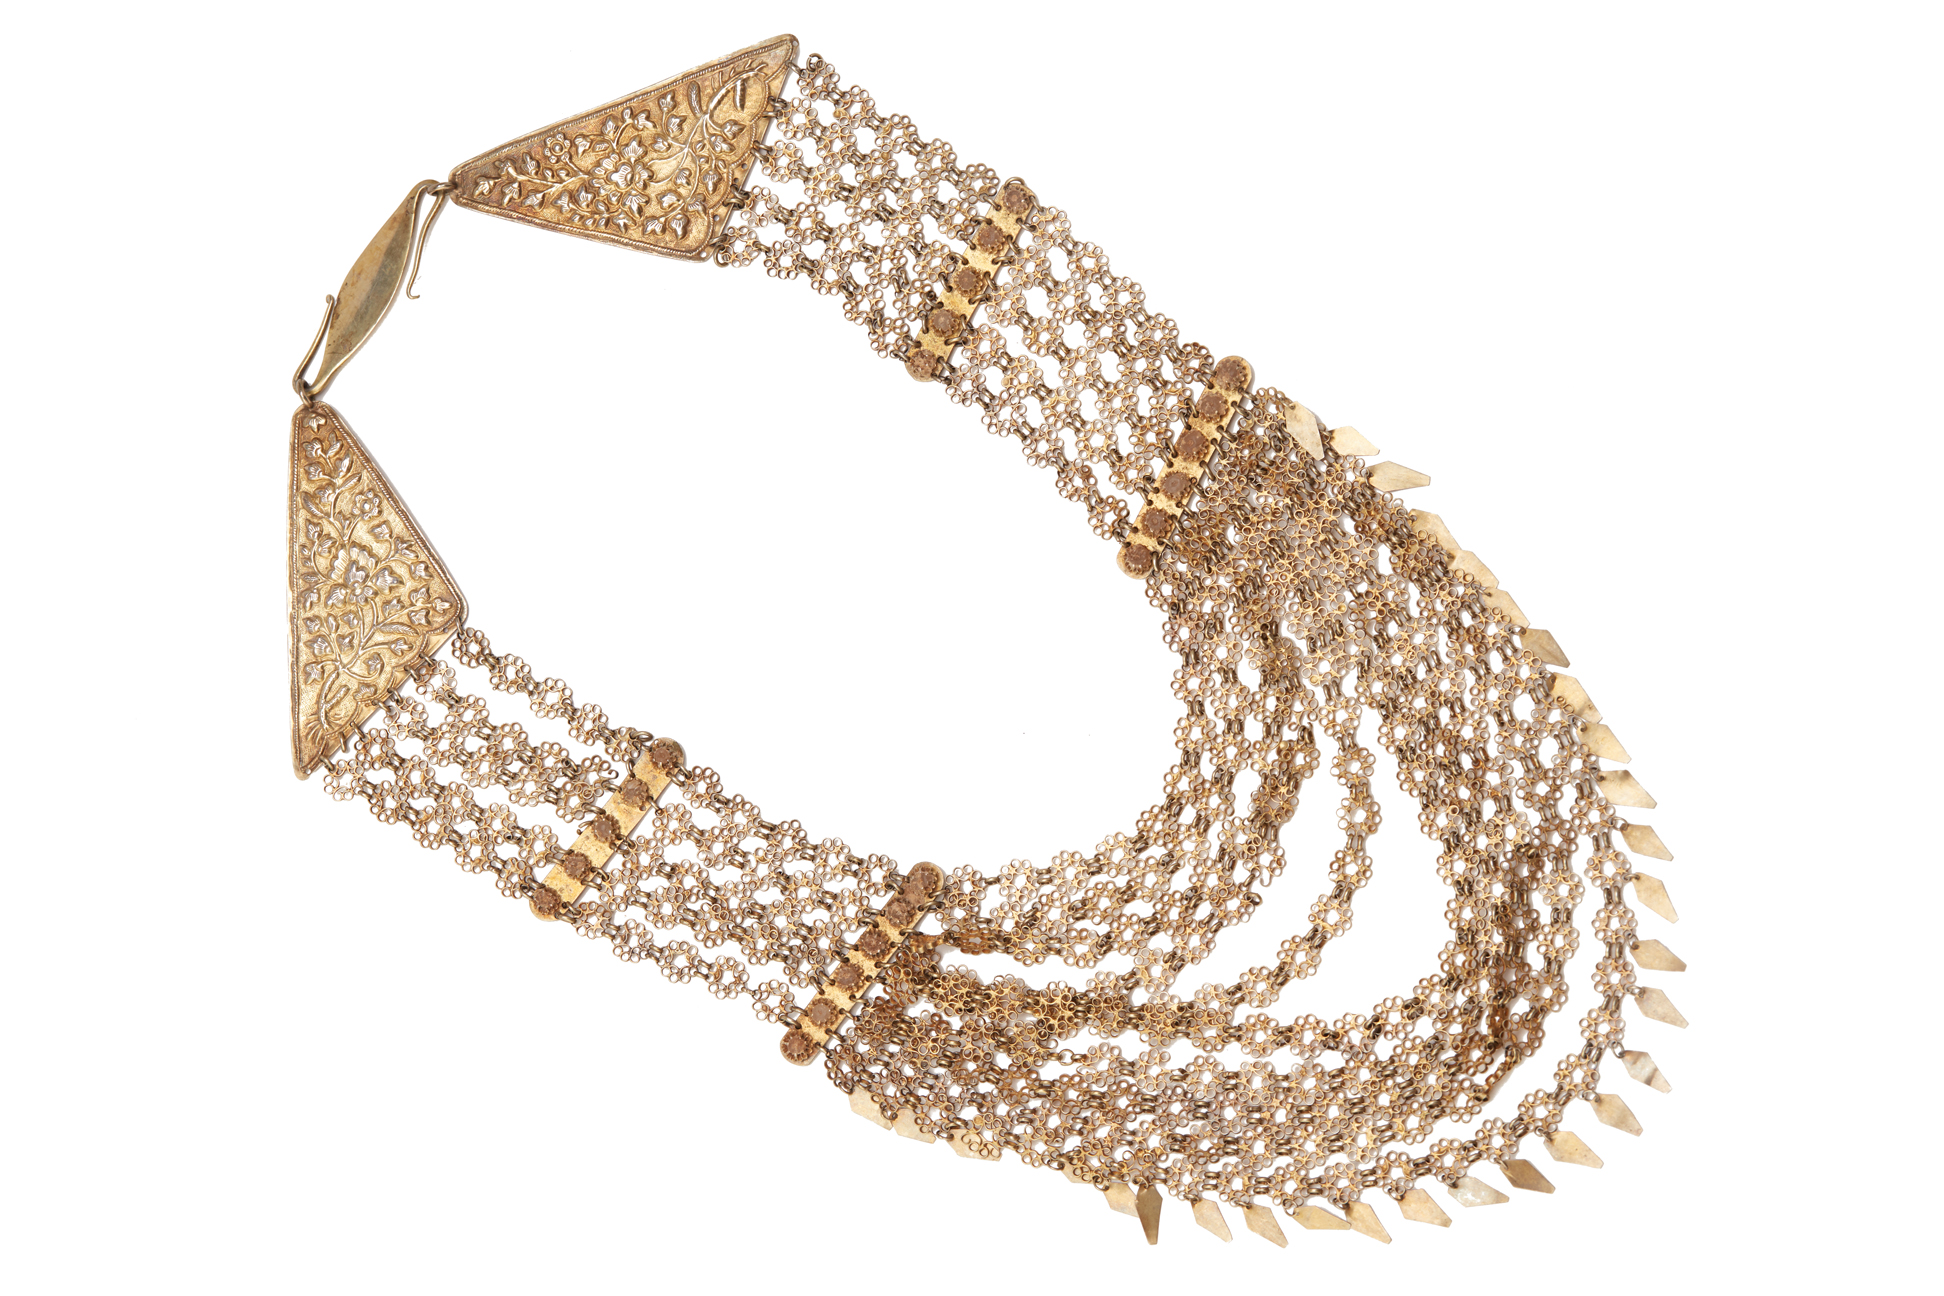 A GILT METAL MULTI-CHAIN NECKLACE